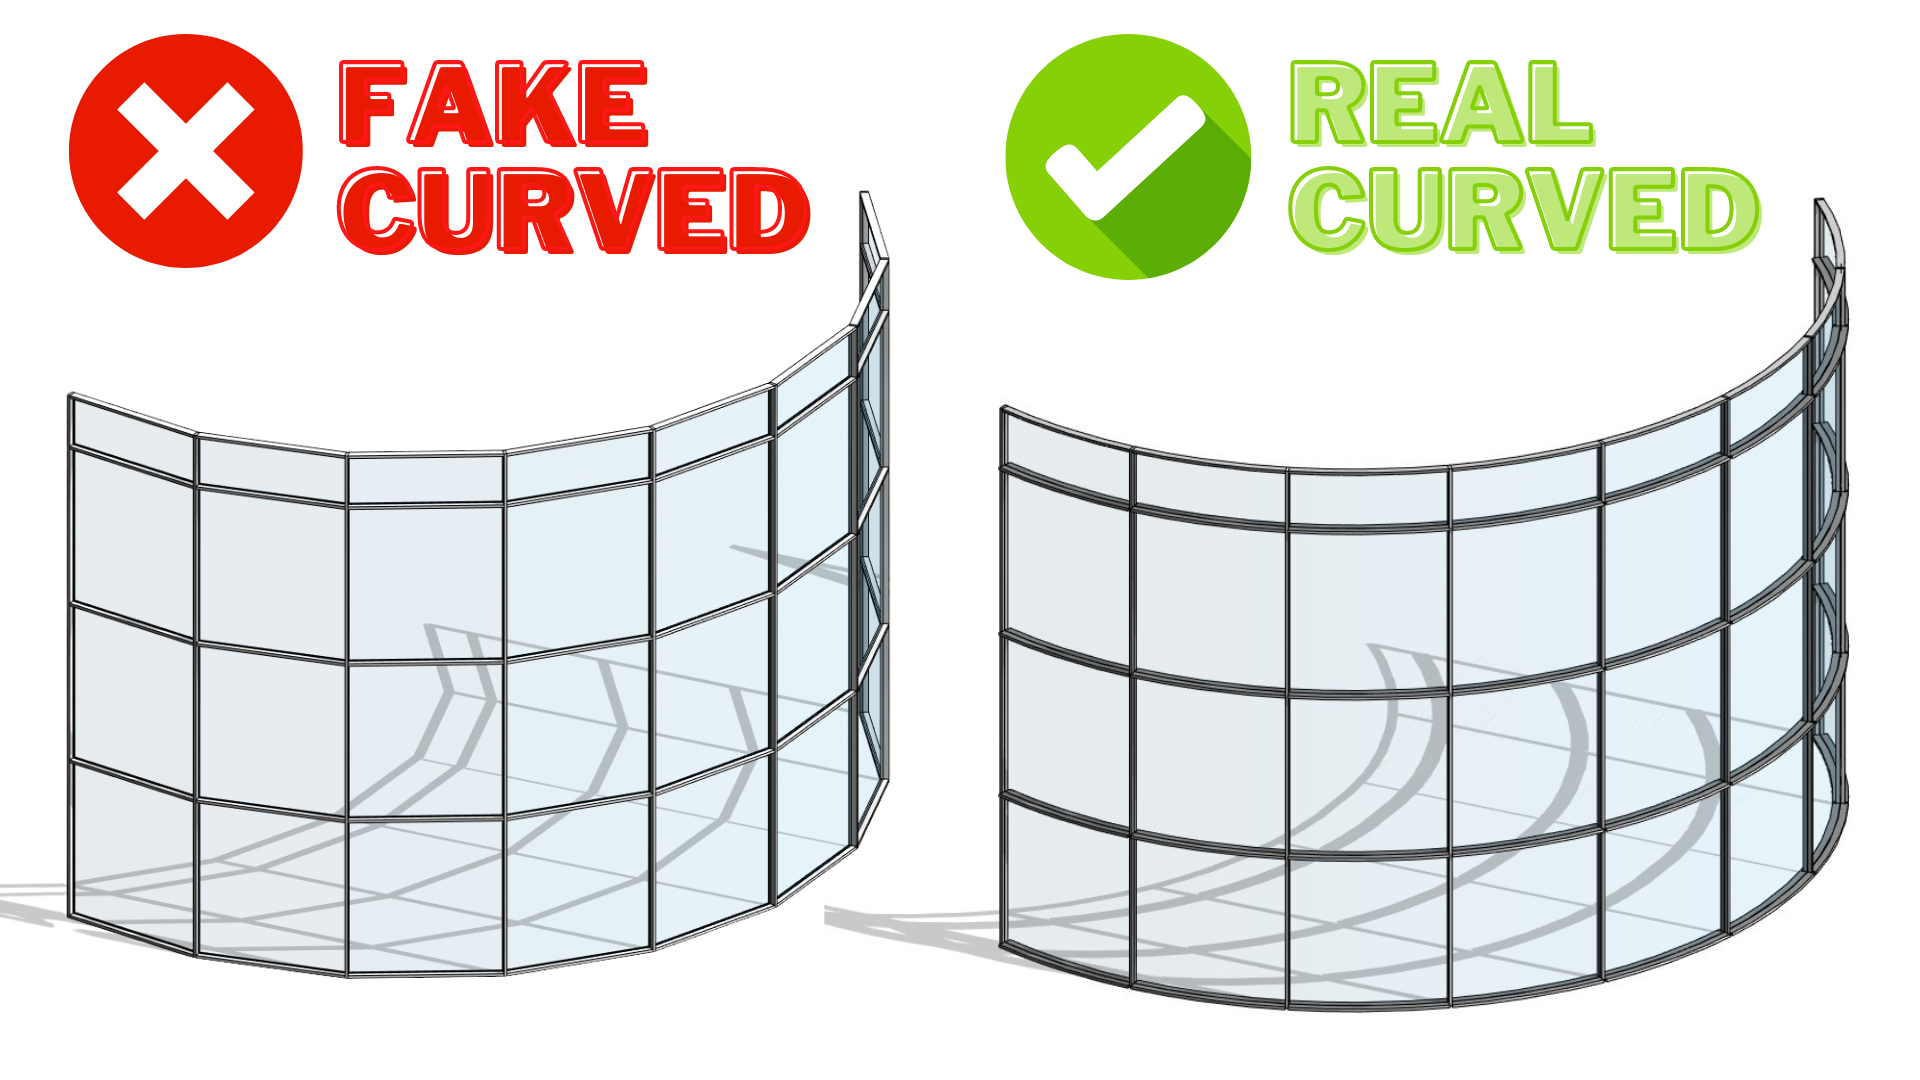 How To Create A Curved Curtain Wall In Revit 2017 Www - vrogue.co